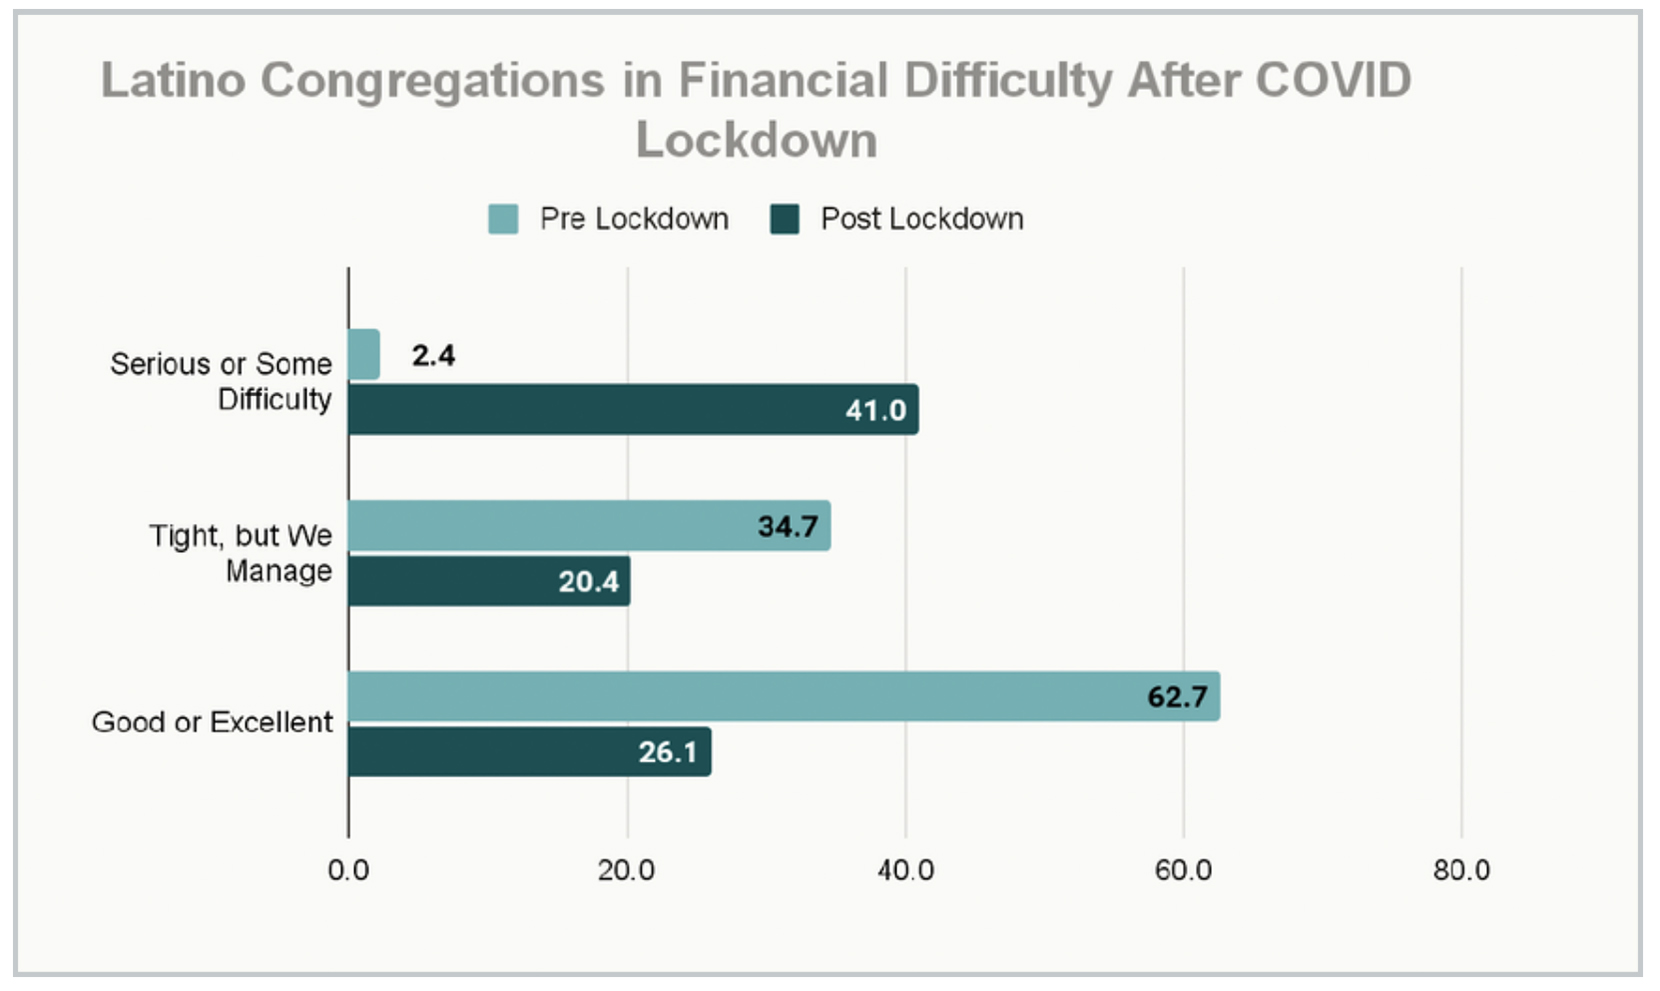 "Latino Congregations in Financial Difficulty After COVID Lockdown" (Graphic courtesy Hartford Institute for Religion Research)